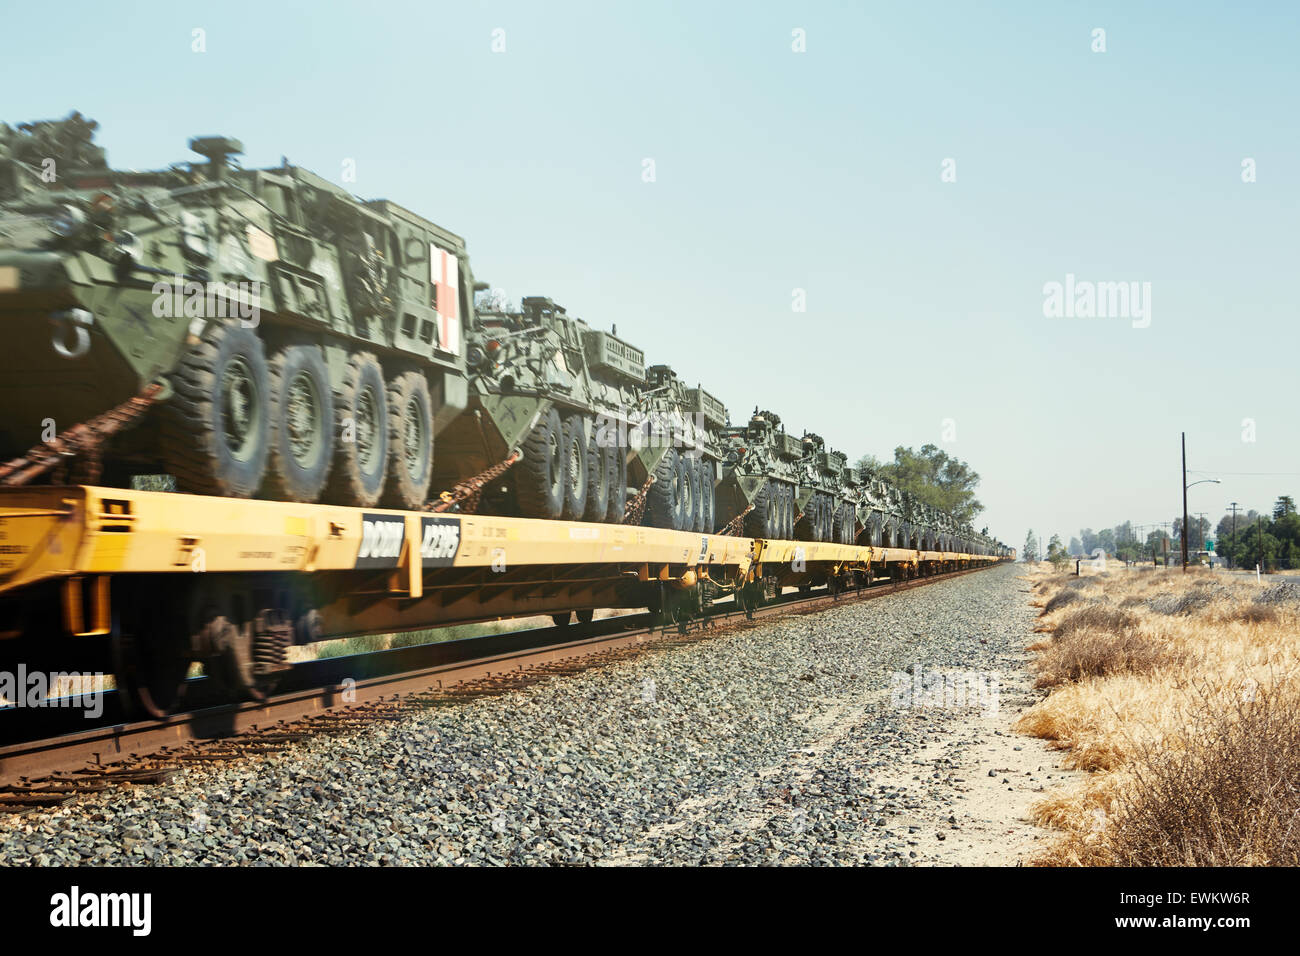 An endless cargo of tanks on a train pulled down tracks in an empty dry landscape. Stock Photo